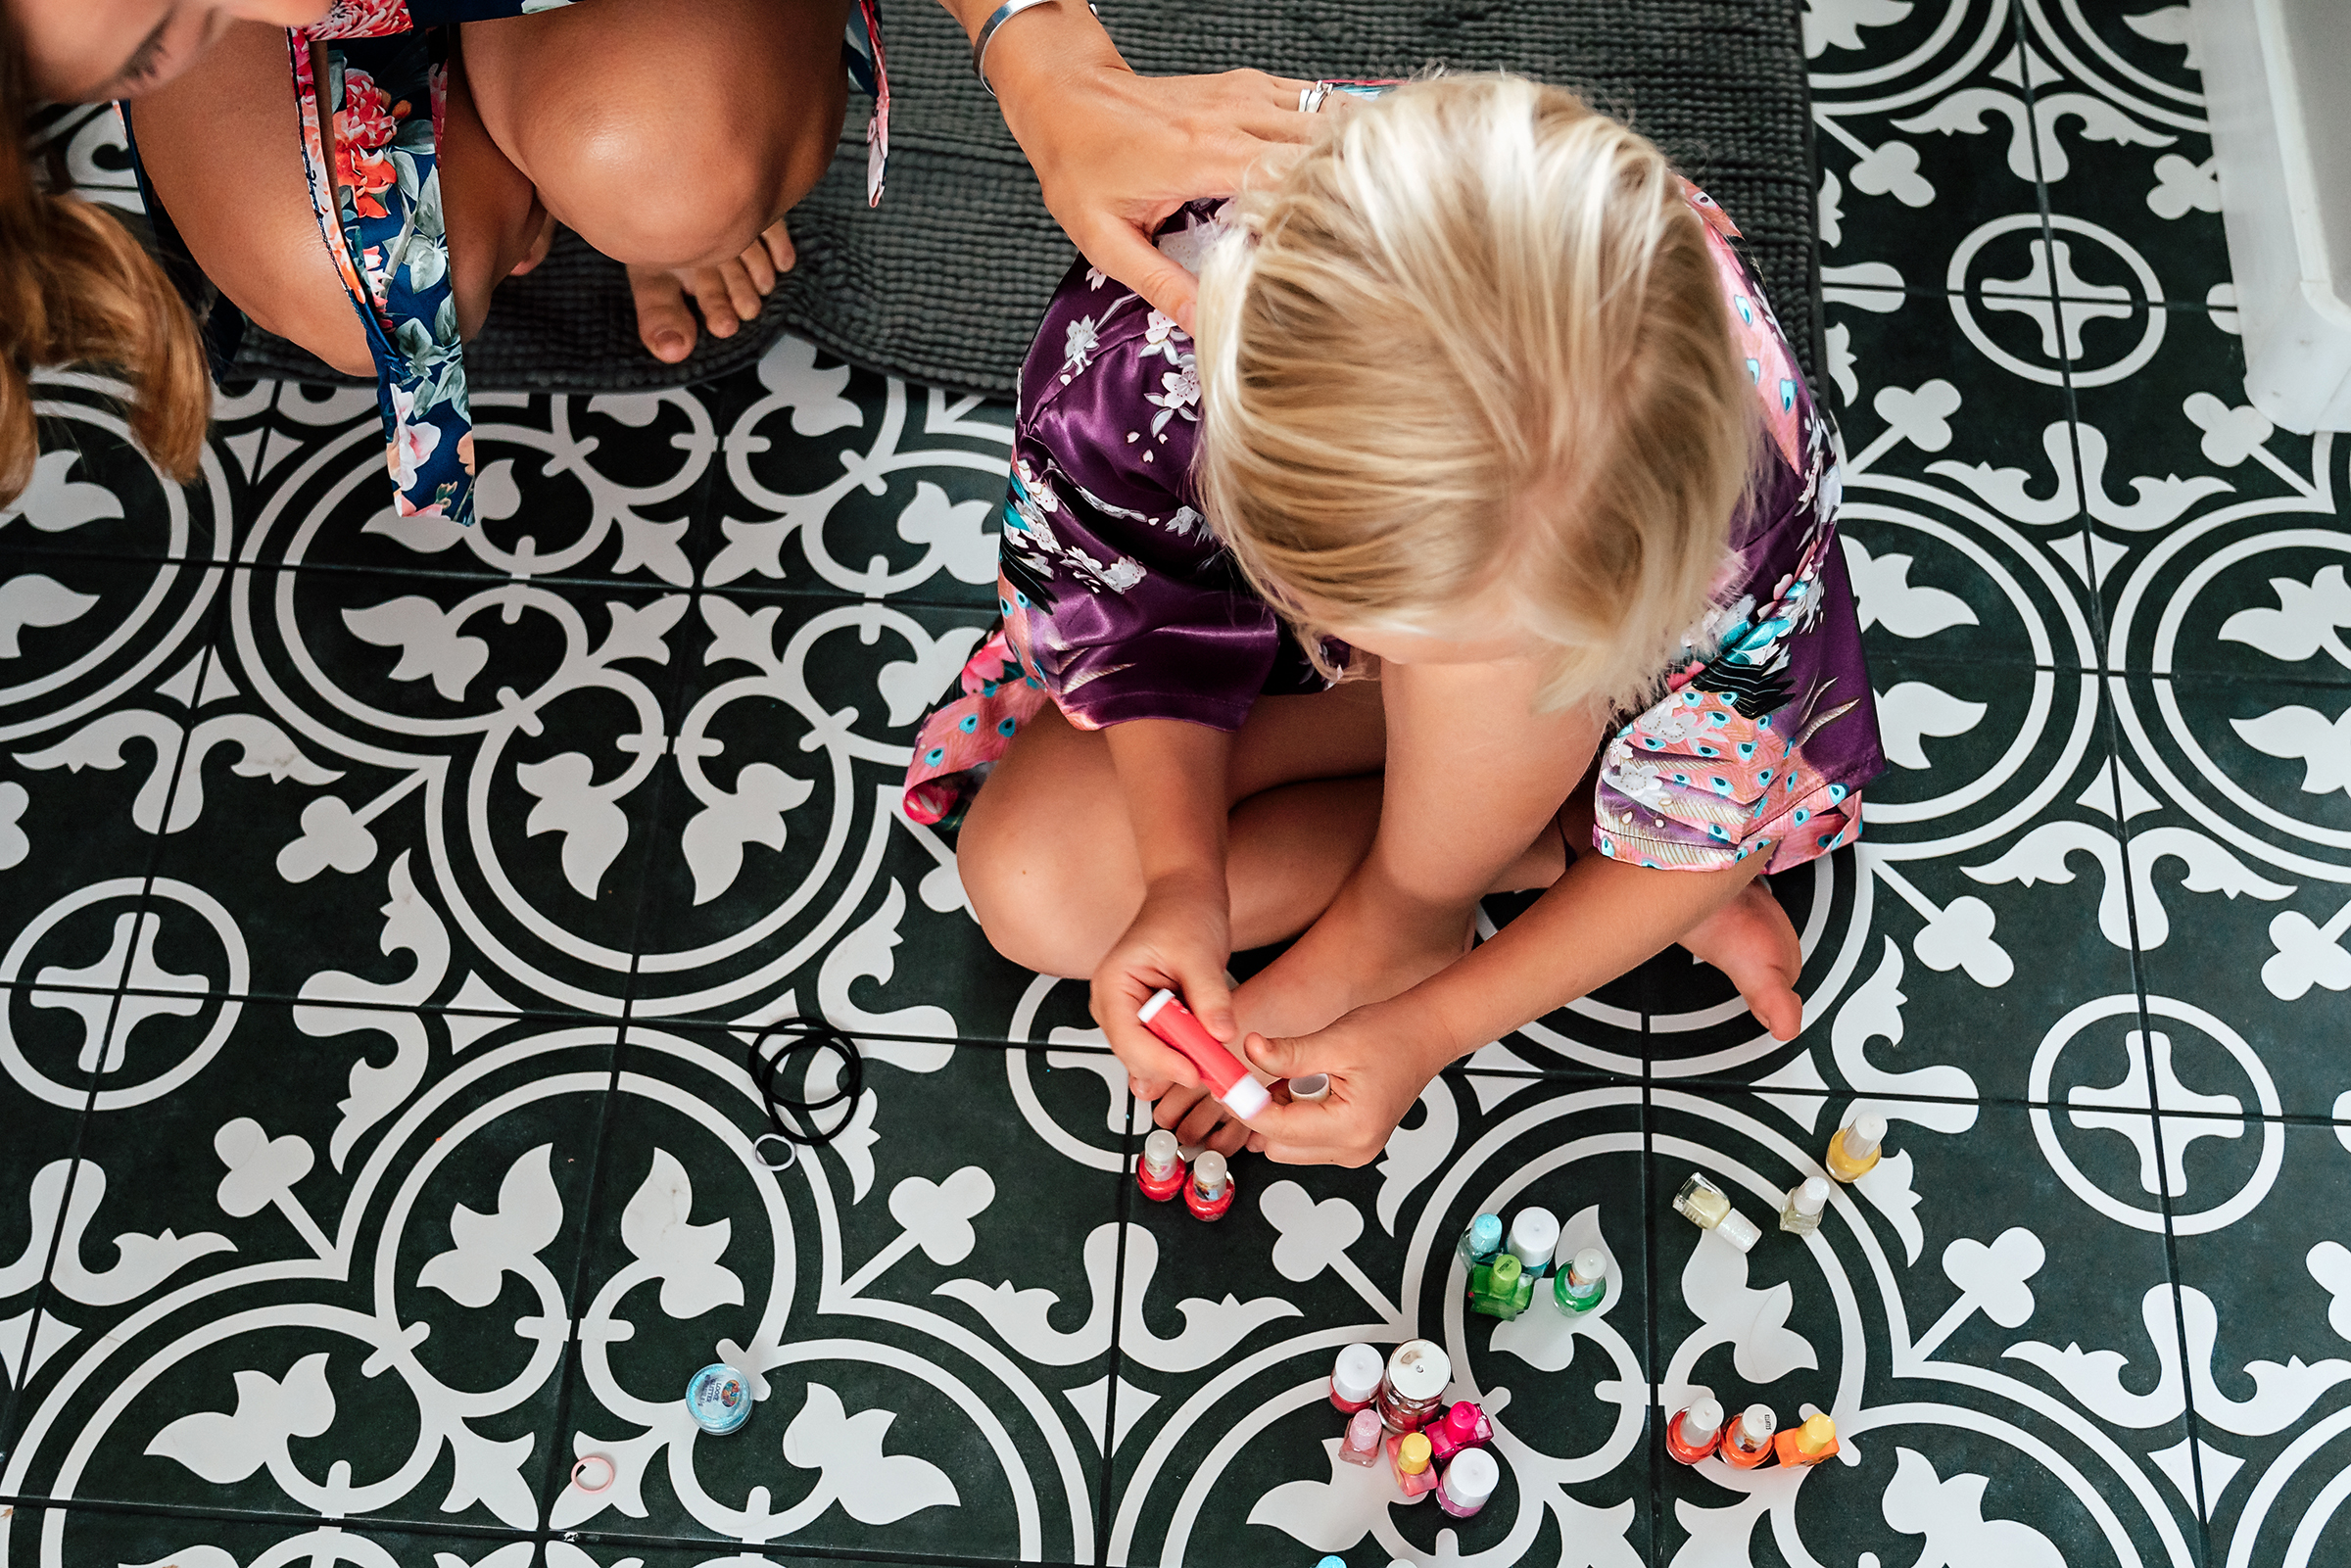 painting toe nails during family session 